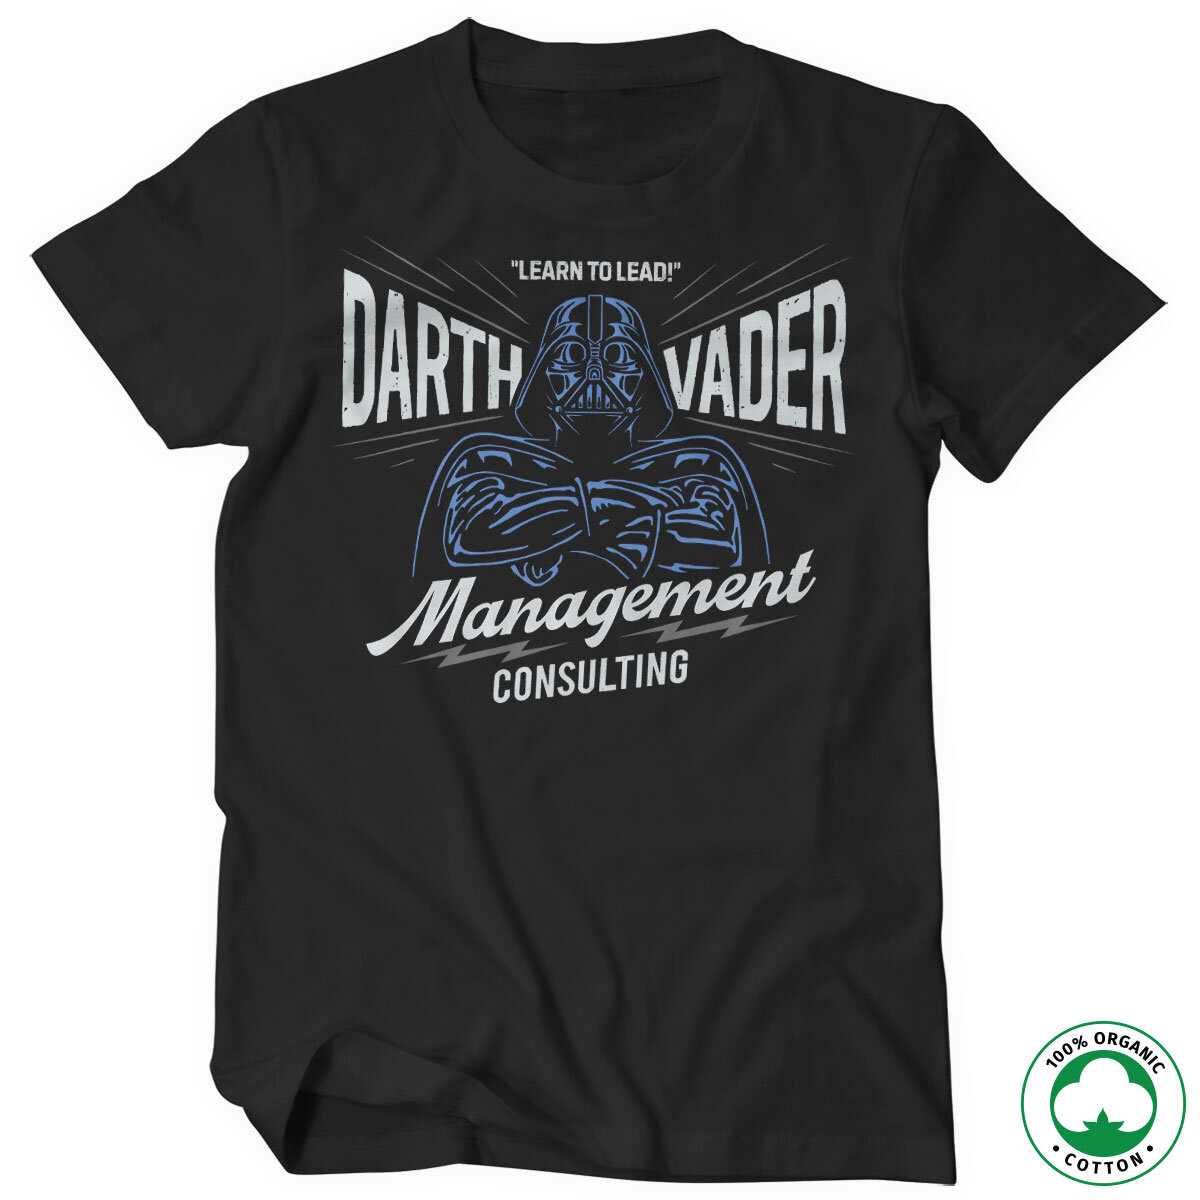 Darth Vader Management Consulting Organic Tee